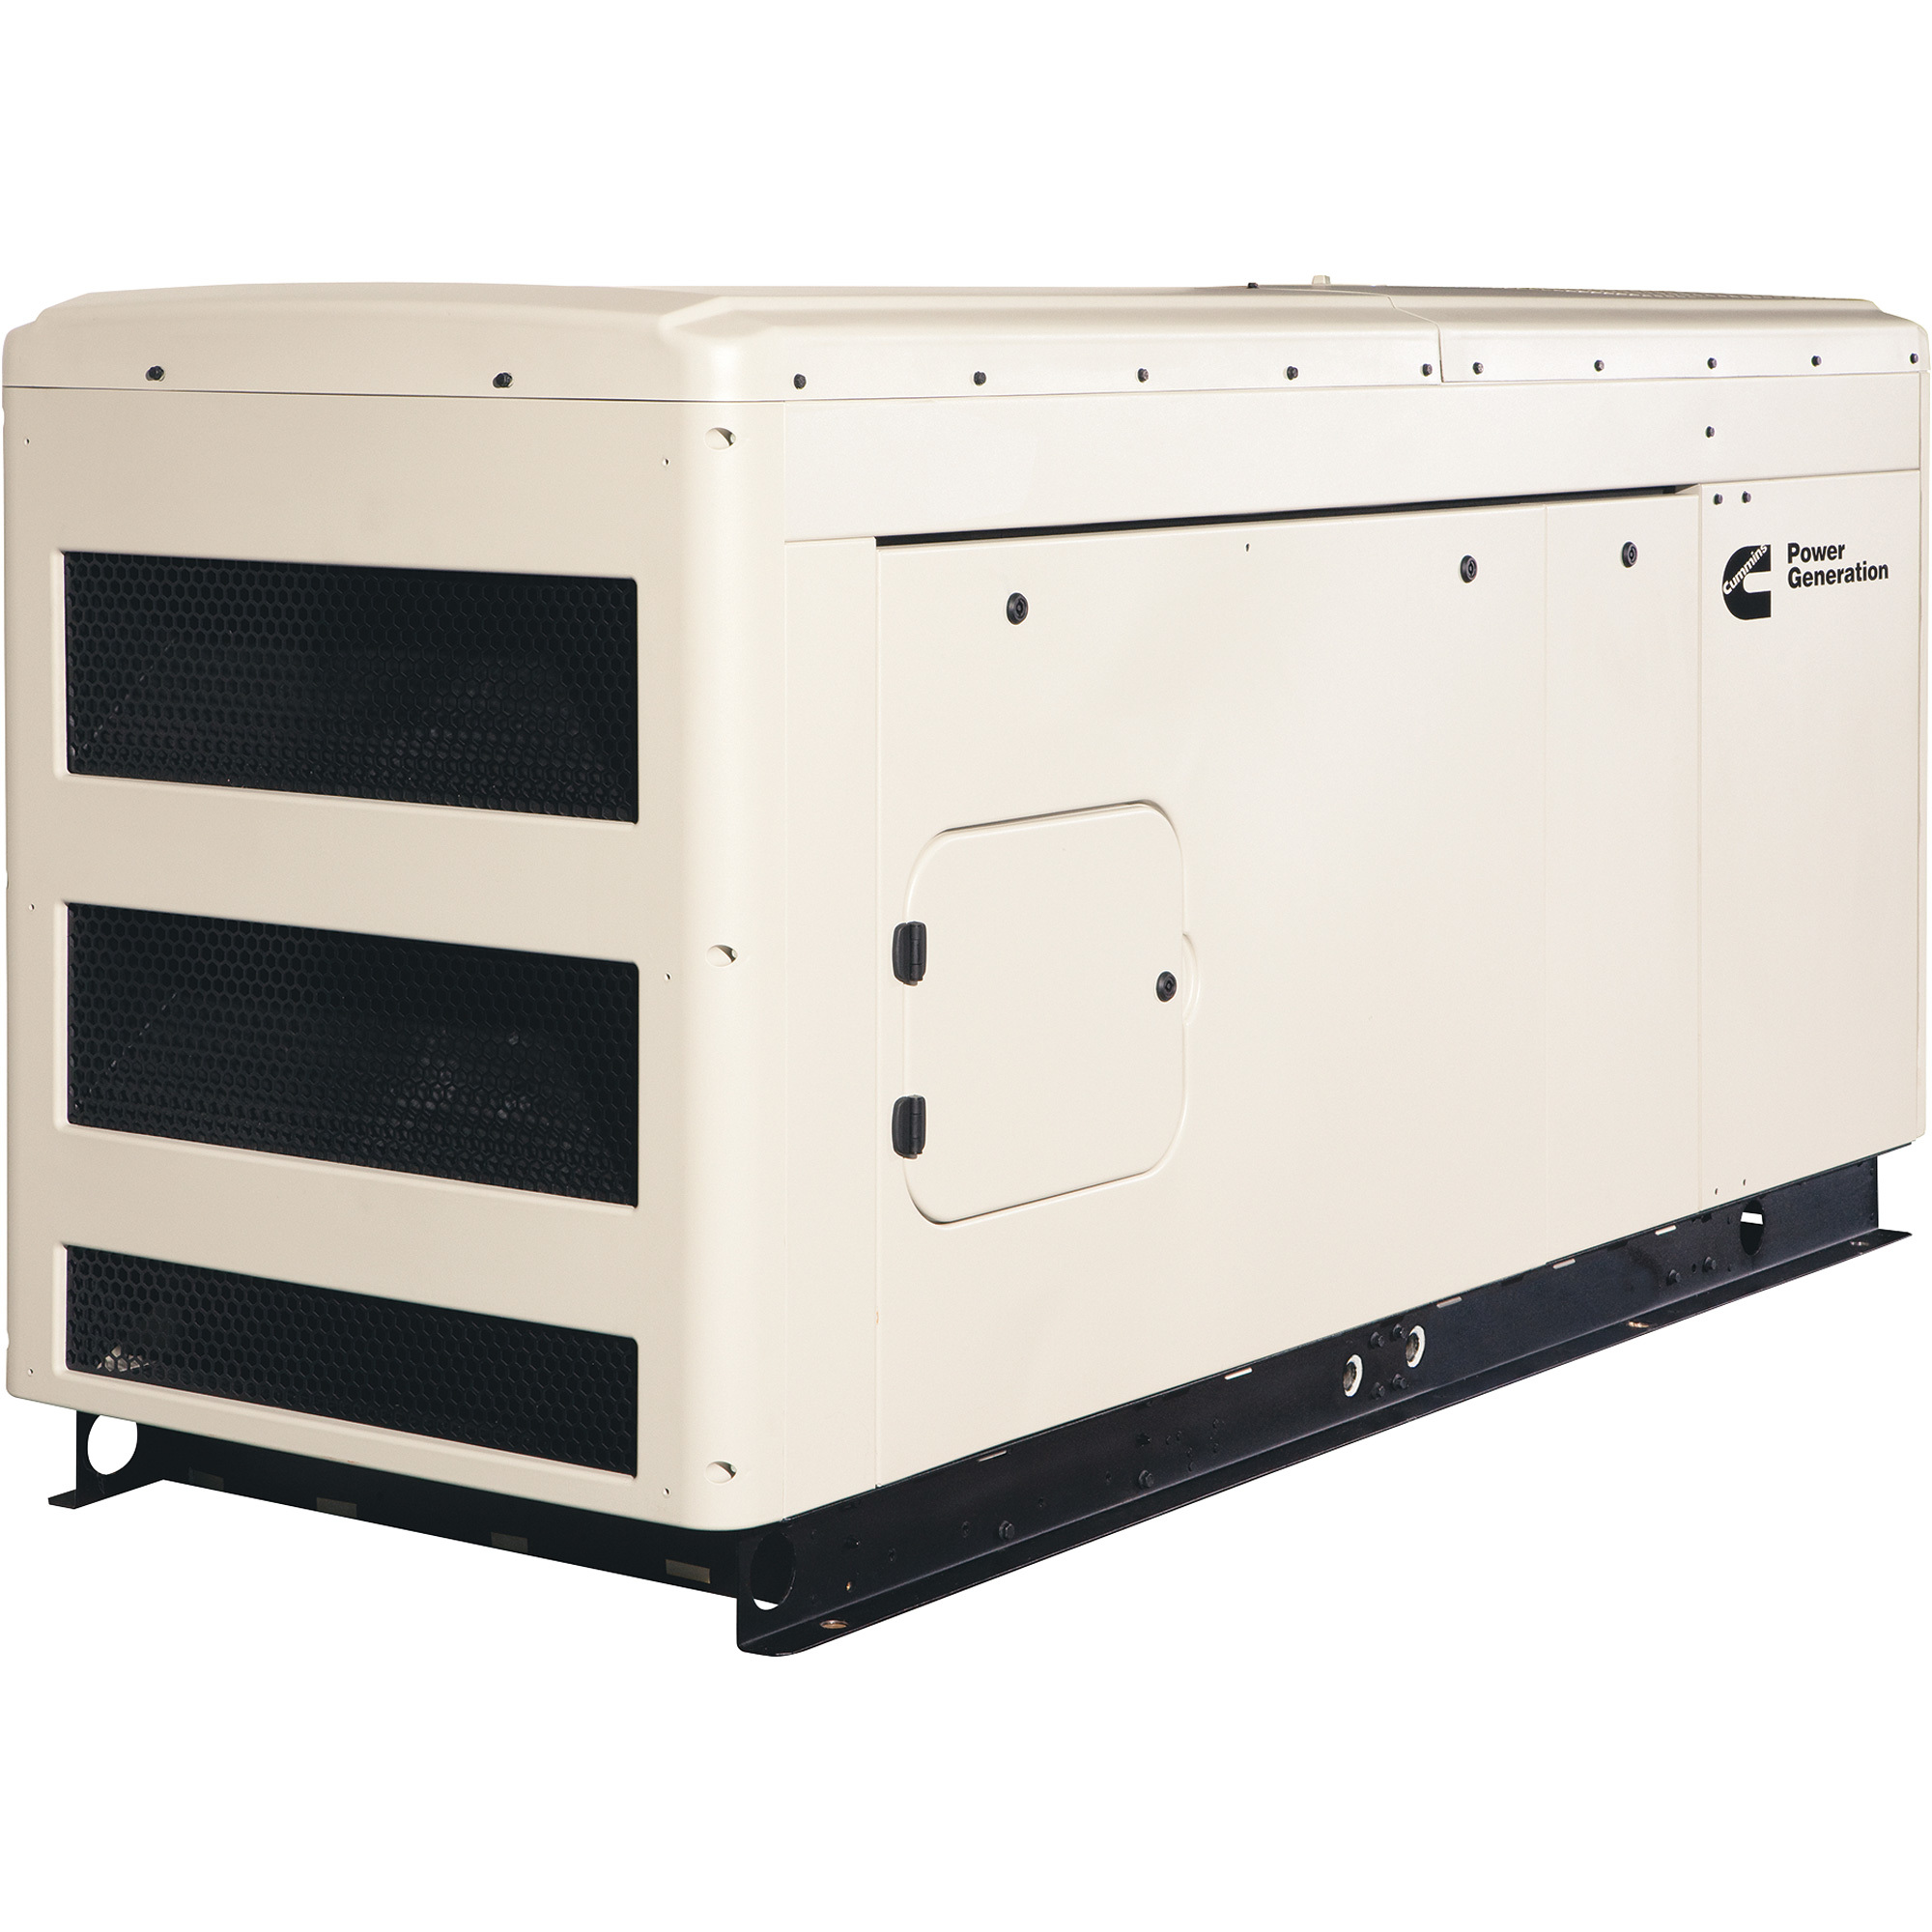 Cummins Commercial Standby Generator 40kW, LP/NG, 120/208 Volts, 3 Phase